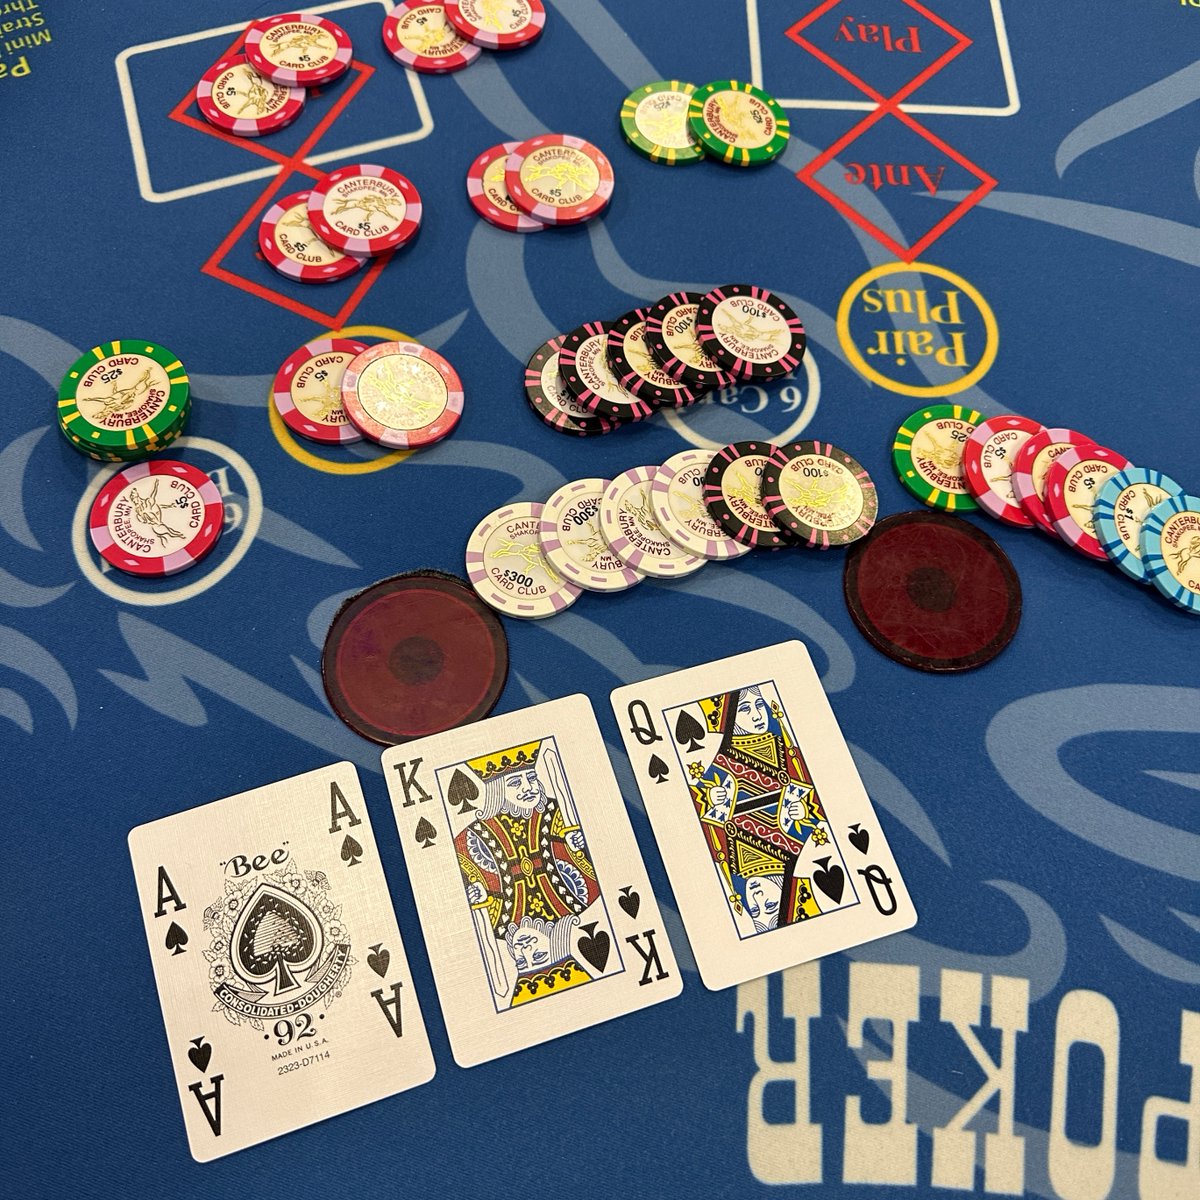 Talk about a lucky Friday the 13th! Last night, two of our guests struck jackpots! 💰✨ Blazing 7s lit up with a $3,271.00 win, while Three Card Poker delivered a thrilling $1,442.00 win with AKQ Spades! 🎉💸 #DoubleJackpot #WinningStreak